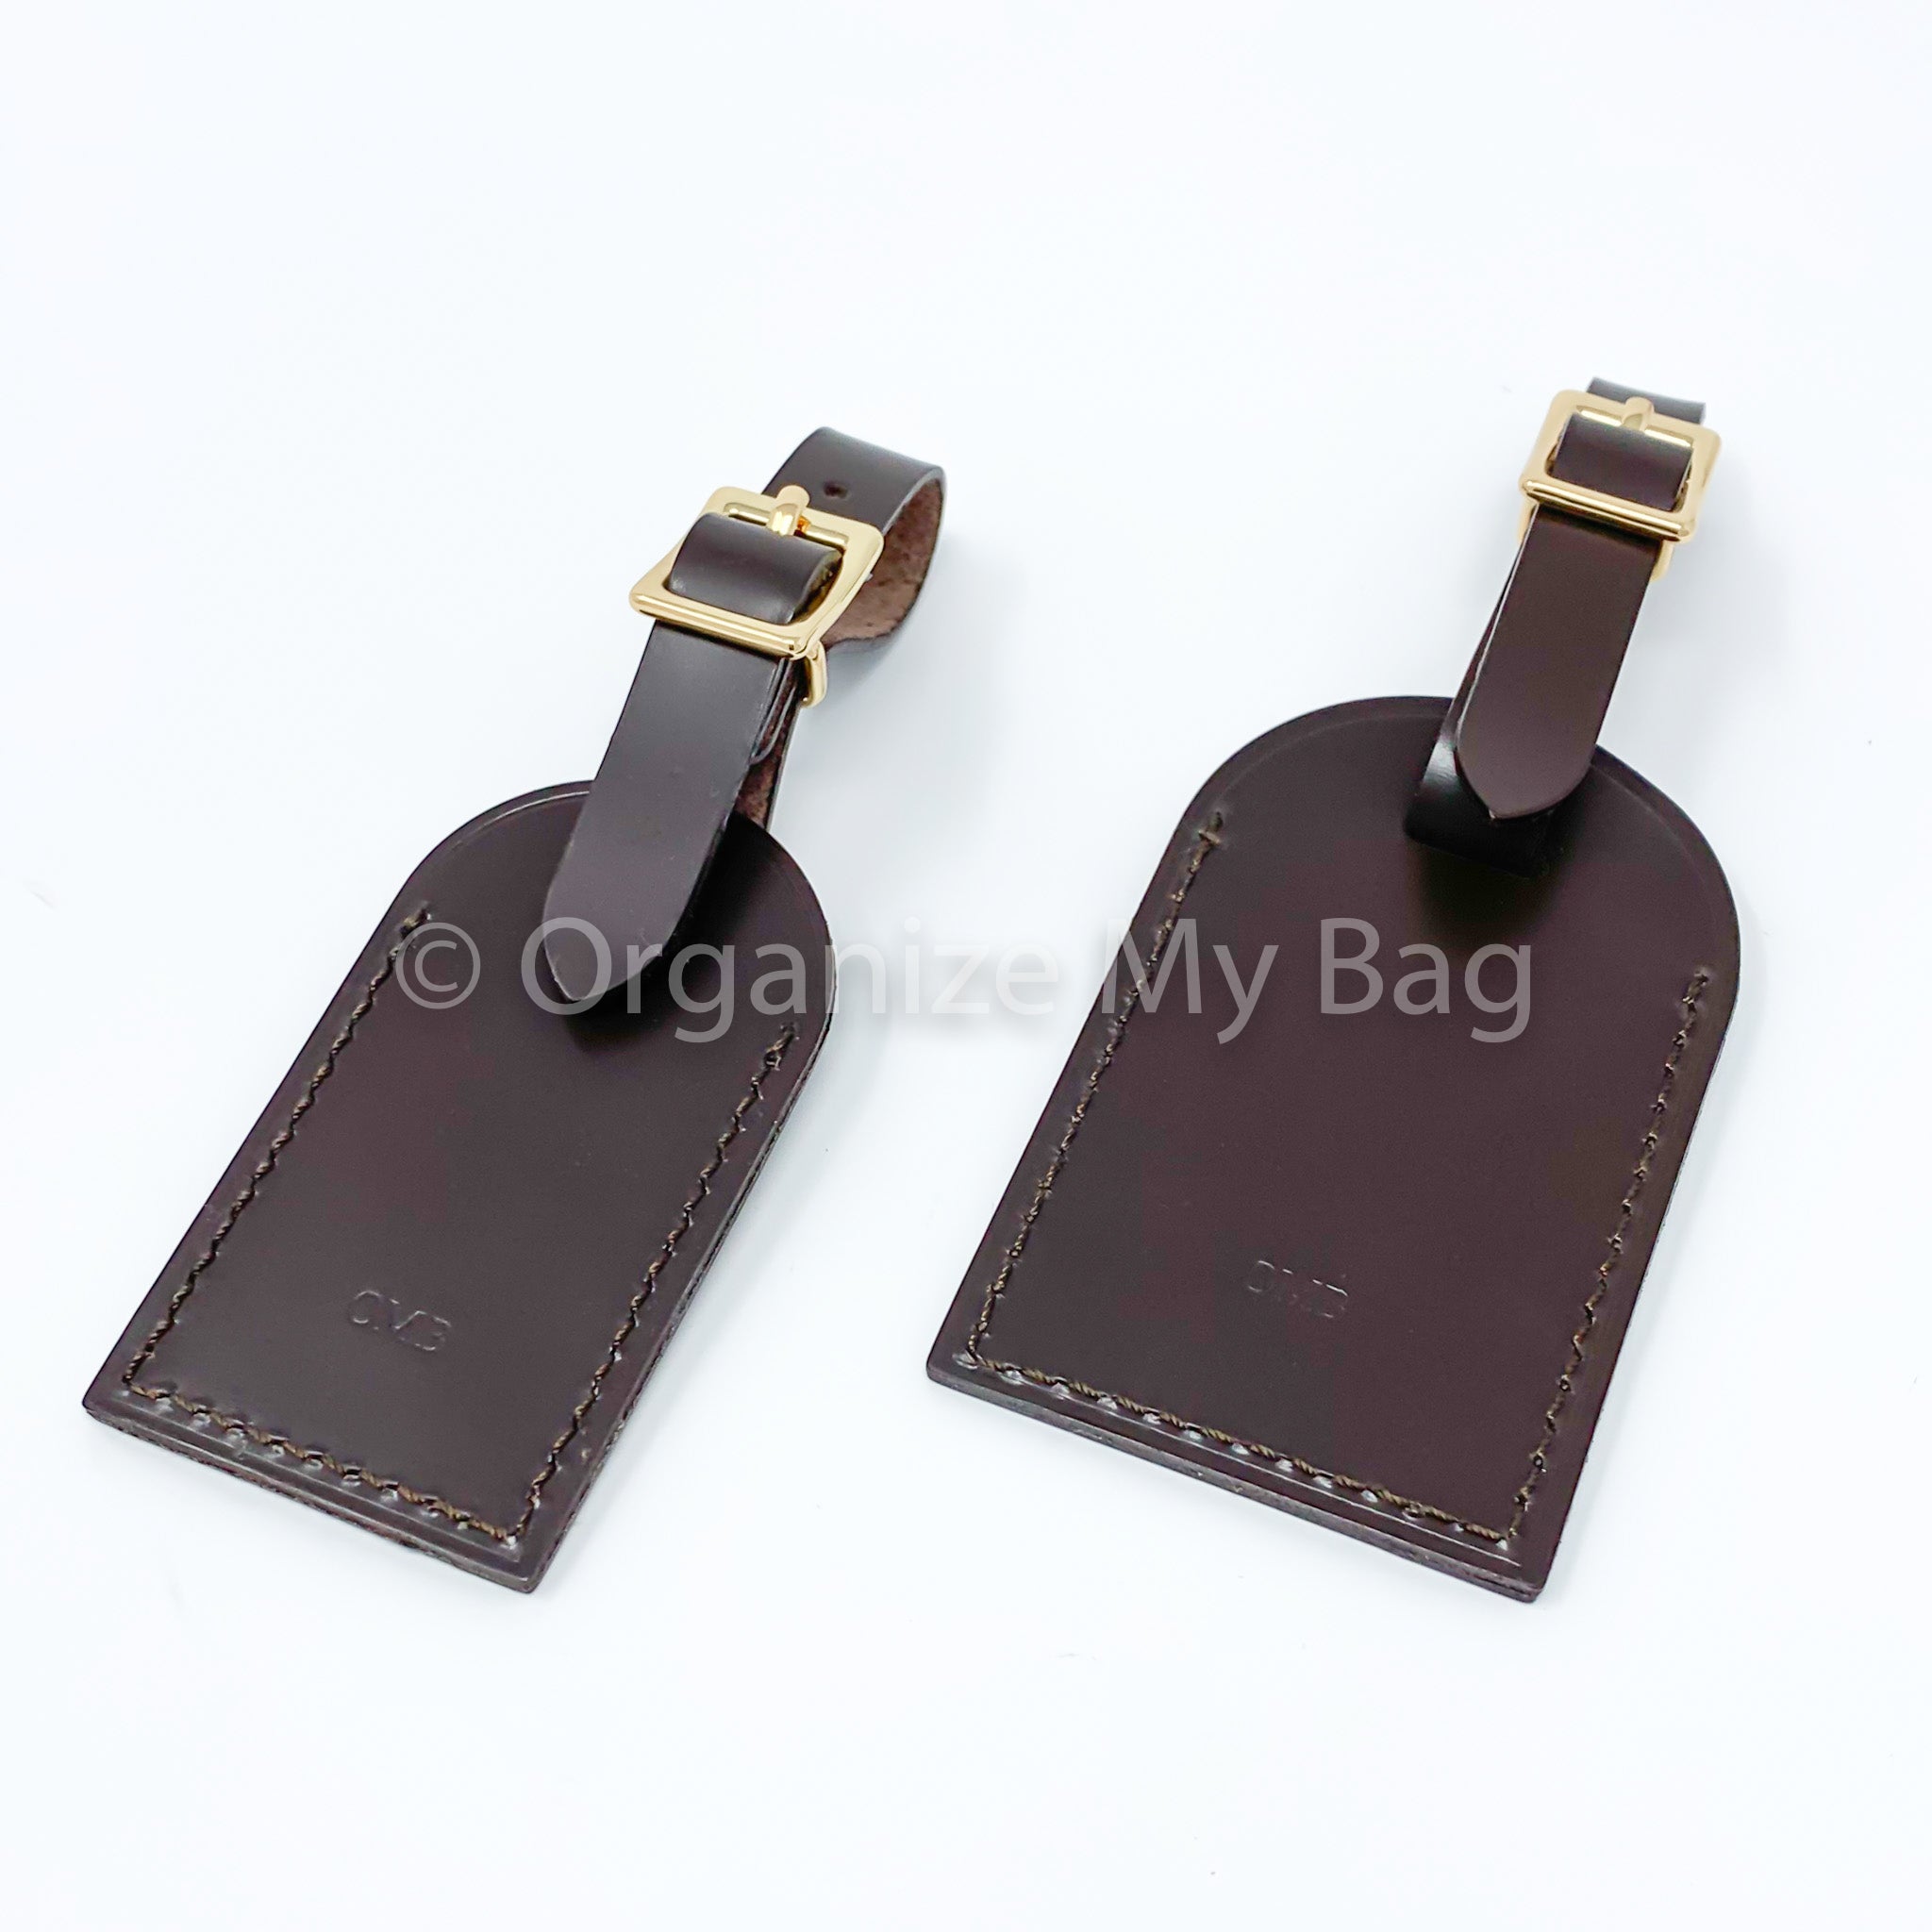 Louis Vuitton Unstamped Black Leather Small Luggage Tag with Gold Hardware